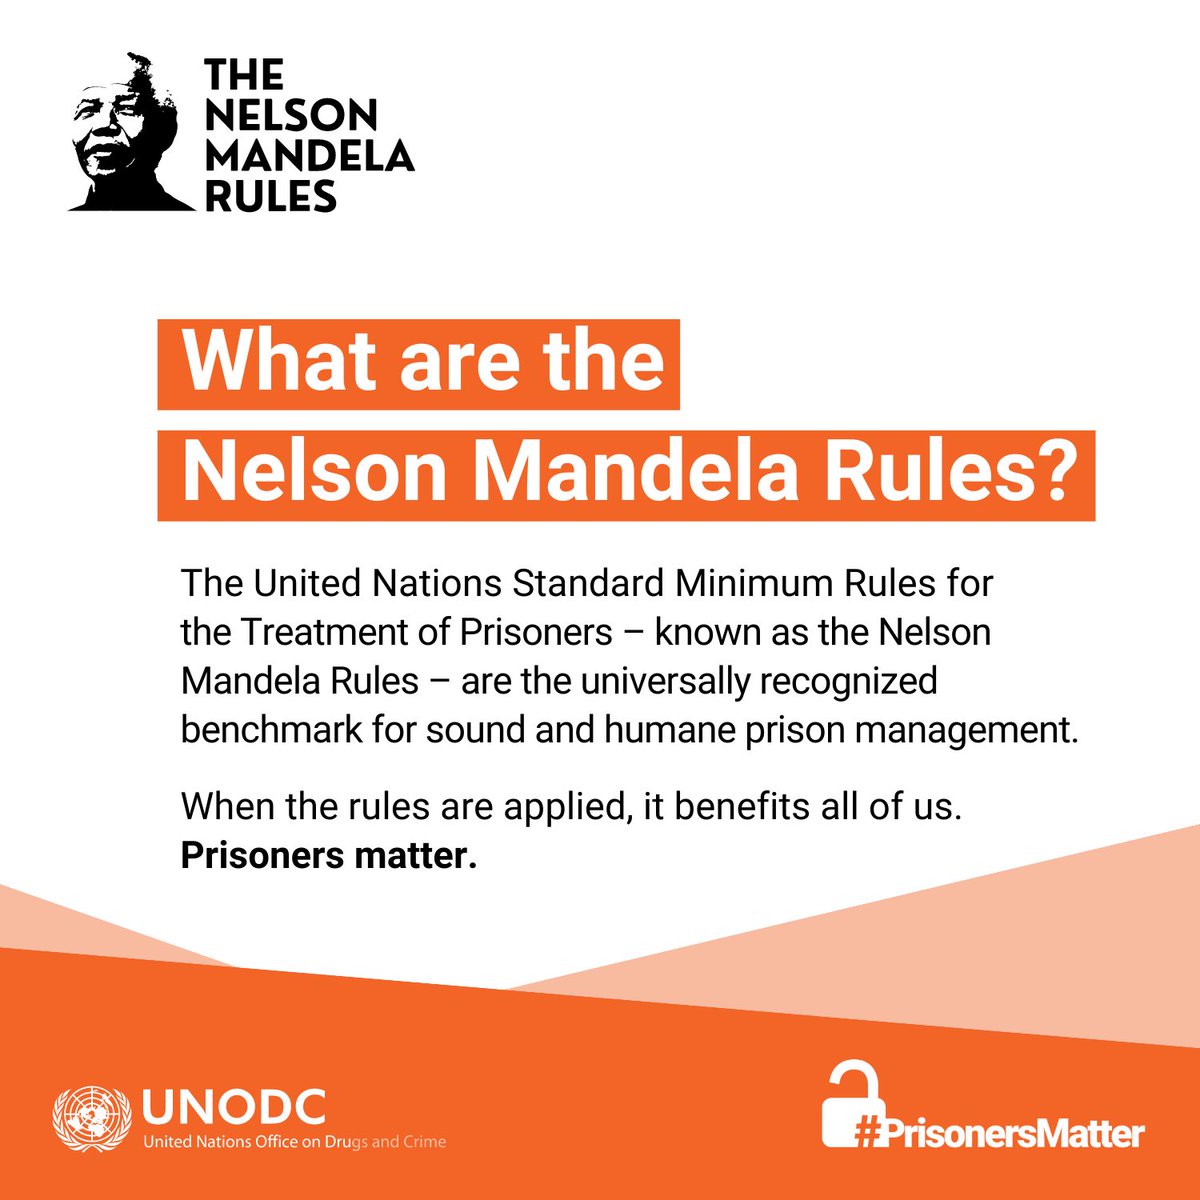 Today is #NelsonMandela International Day.

Join the United Nations Office on Drugs and Crime in sharing why #PrisonersMatter and in calling for the universal practical application of the UN Standard Minimum Rules for the Treatment of Prisoners – the Nelson #MandelaRules.